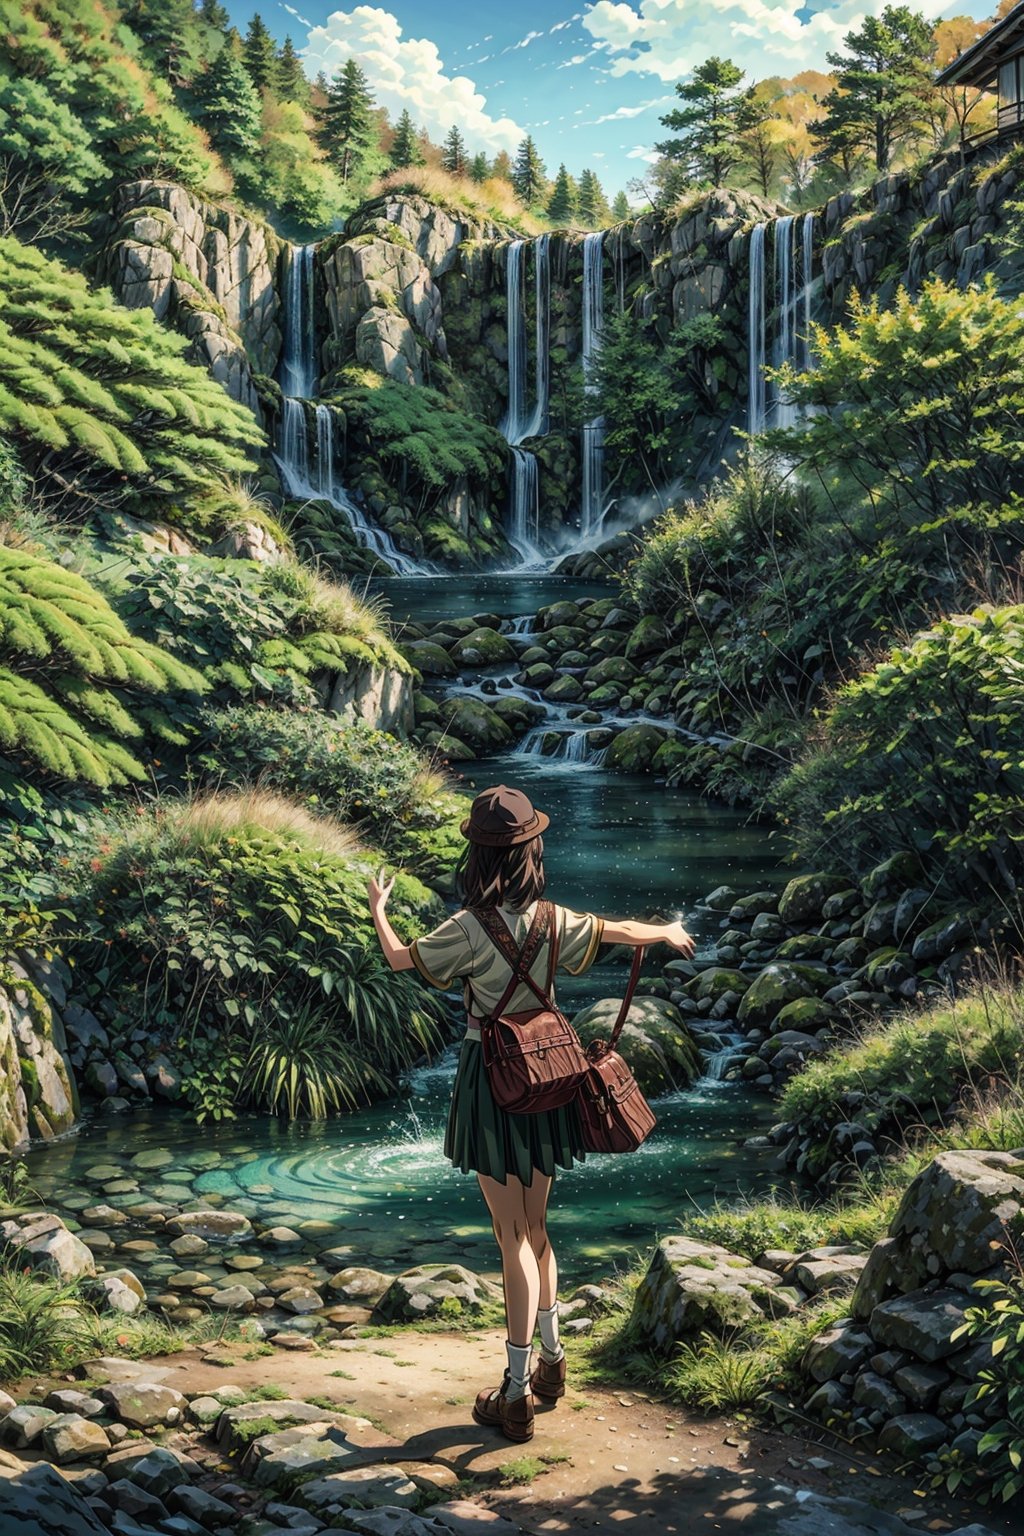 (4k), (masterpiece), (best quality),(extremely intricate), (realistic), (sharp focus), (cinematic lighting), (extremely detailed), Ghibli,Miyazaki, anime

A young girl and her forest spirit friend flying through a lush green forest with waterfalls and ancient trees, in the style of Studio Ghibli



lush meadows, winding rivers, small villages, clear skies, bright sunlight,High detailed 